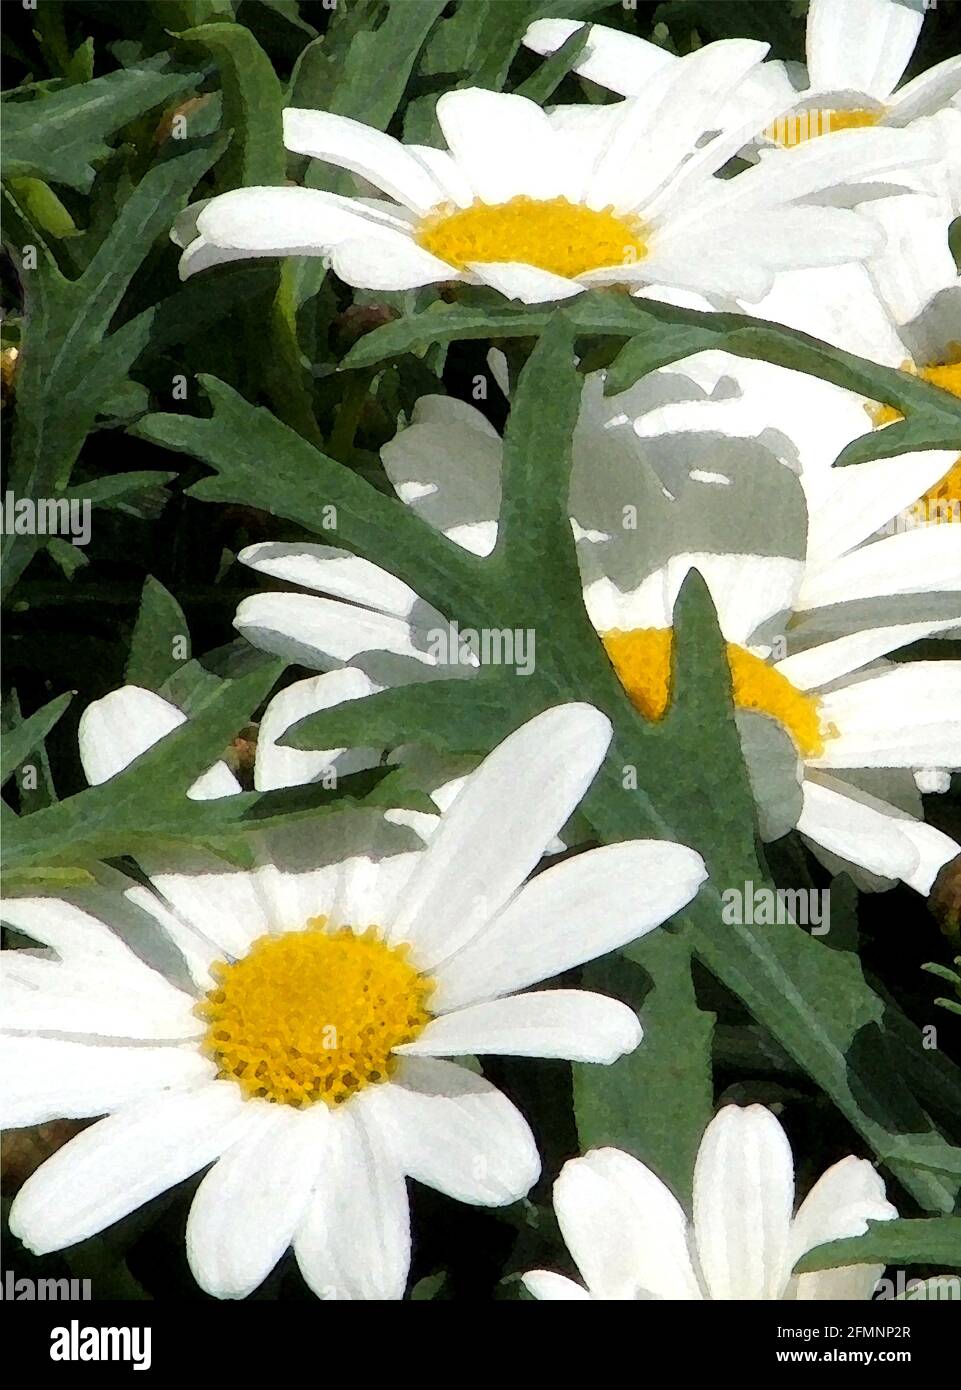 Marguerites (Chrysanthemum frutescens) One of Forty-two Iconic Images of English Garden Flowers, Wildflowers and Rural Landscapes. Stock Photo